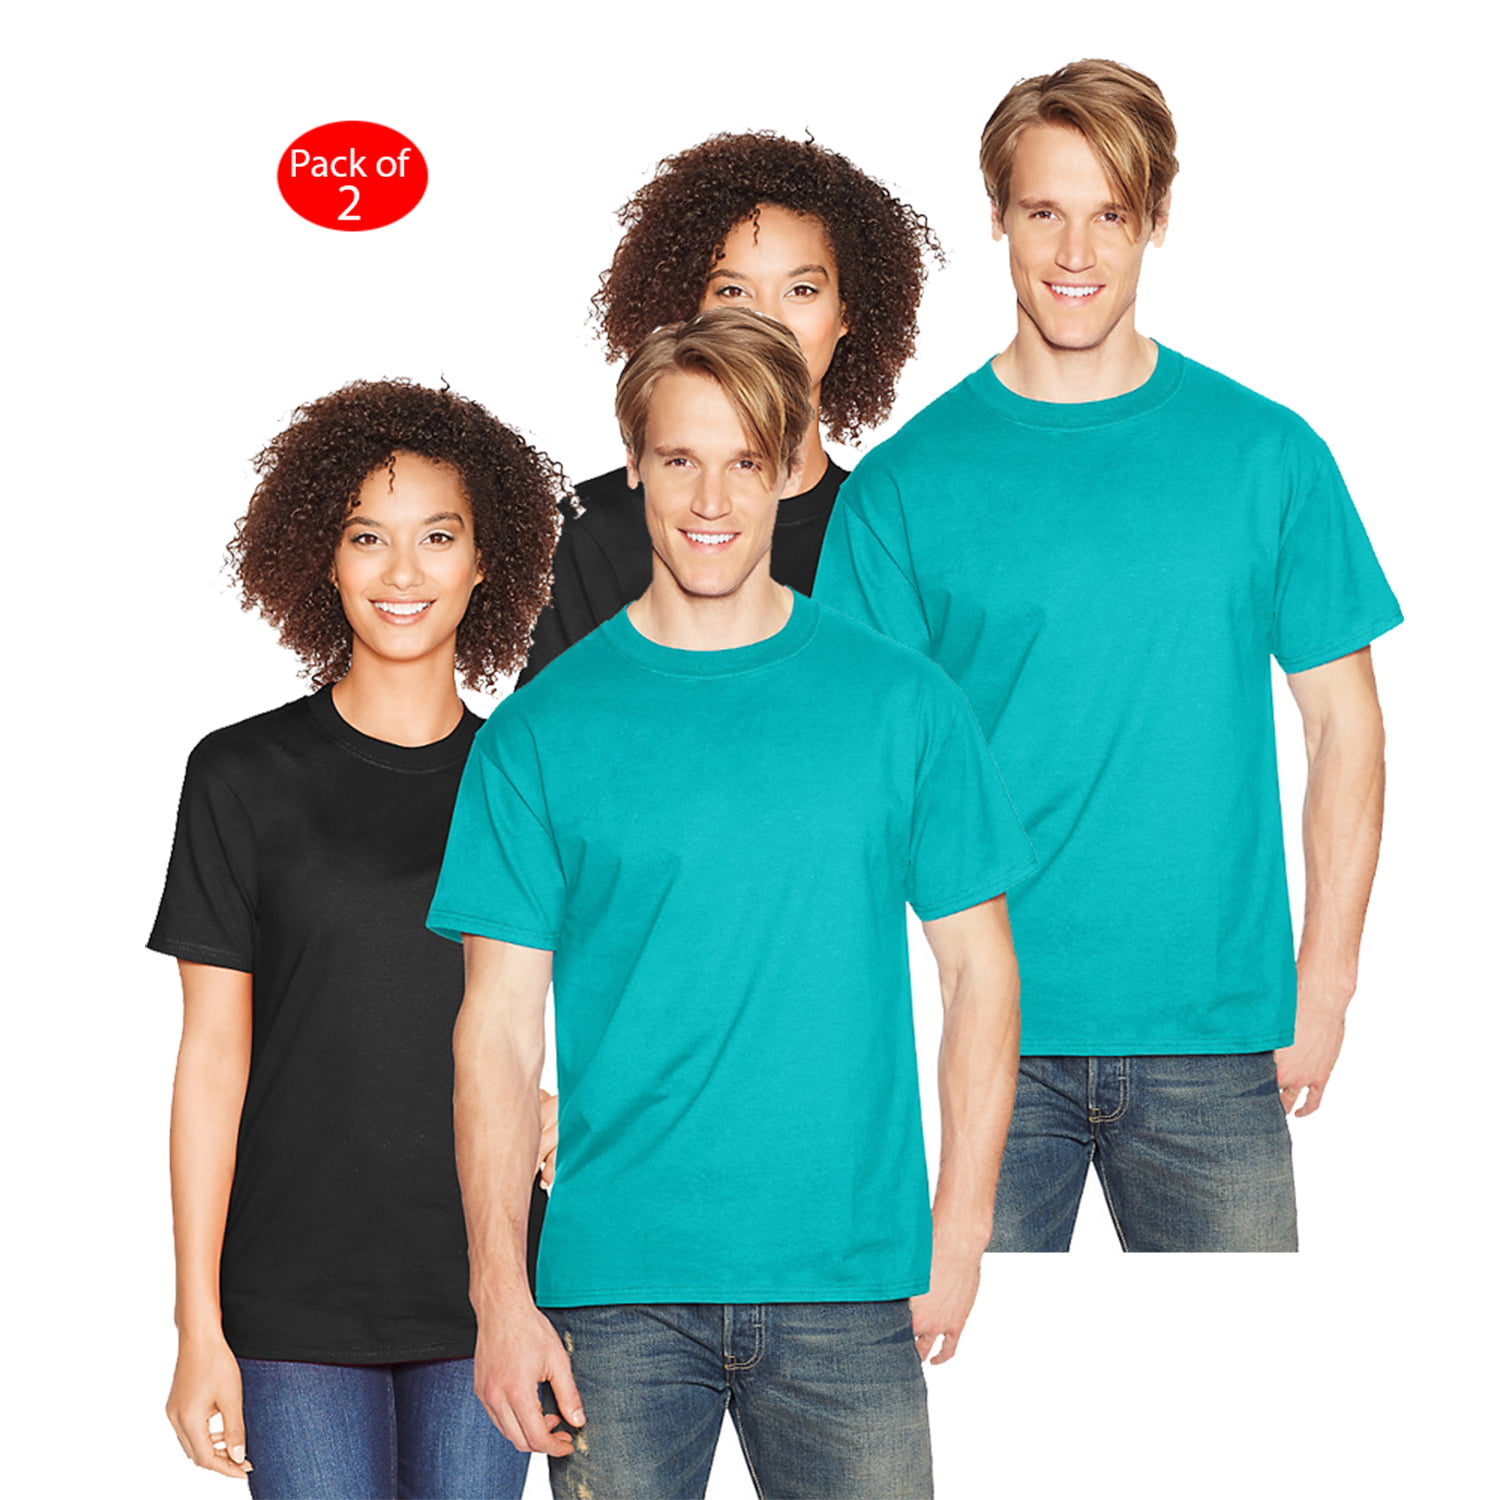 Hanes Beefy-T Adult Short-Sleeve T-Shirt, Color: Teal, Size: 3XL ...